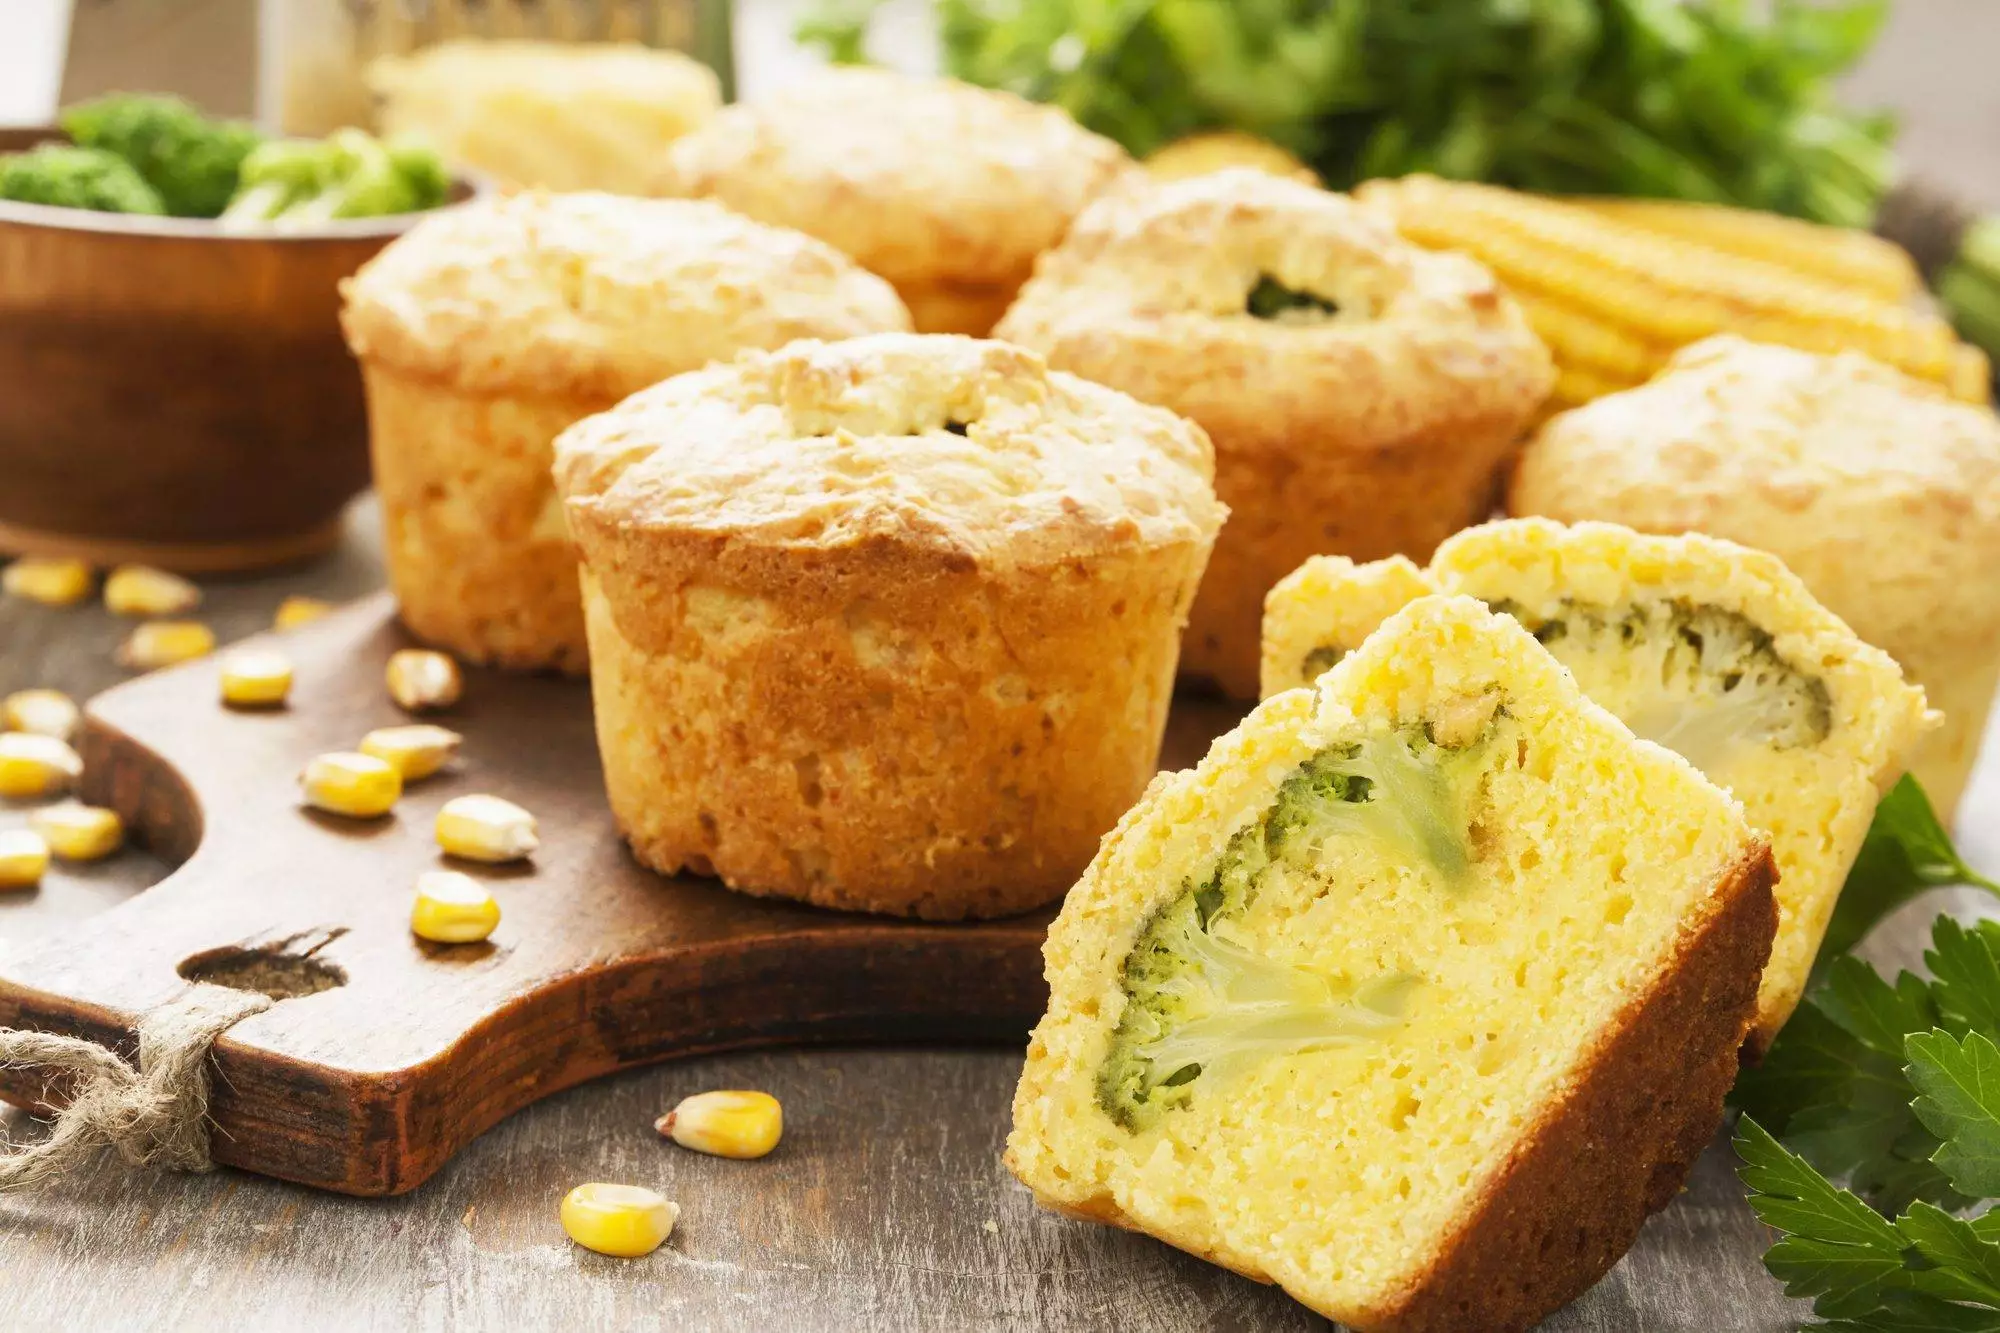 Corn muffins with broccoli on the table